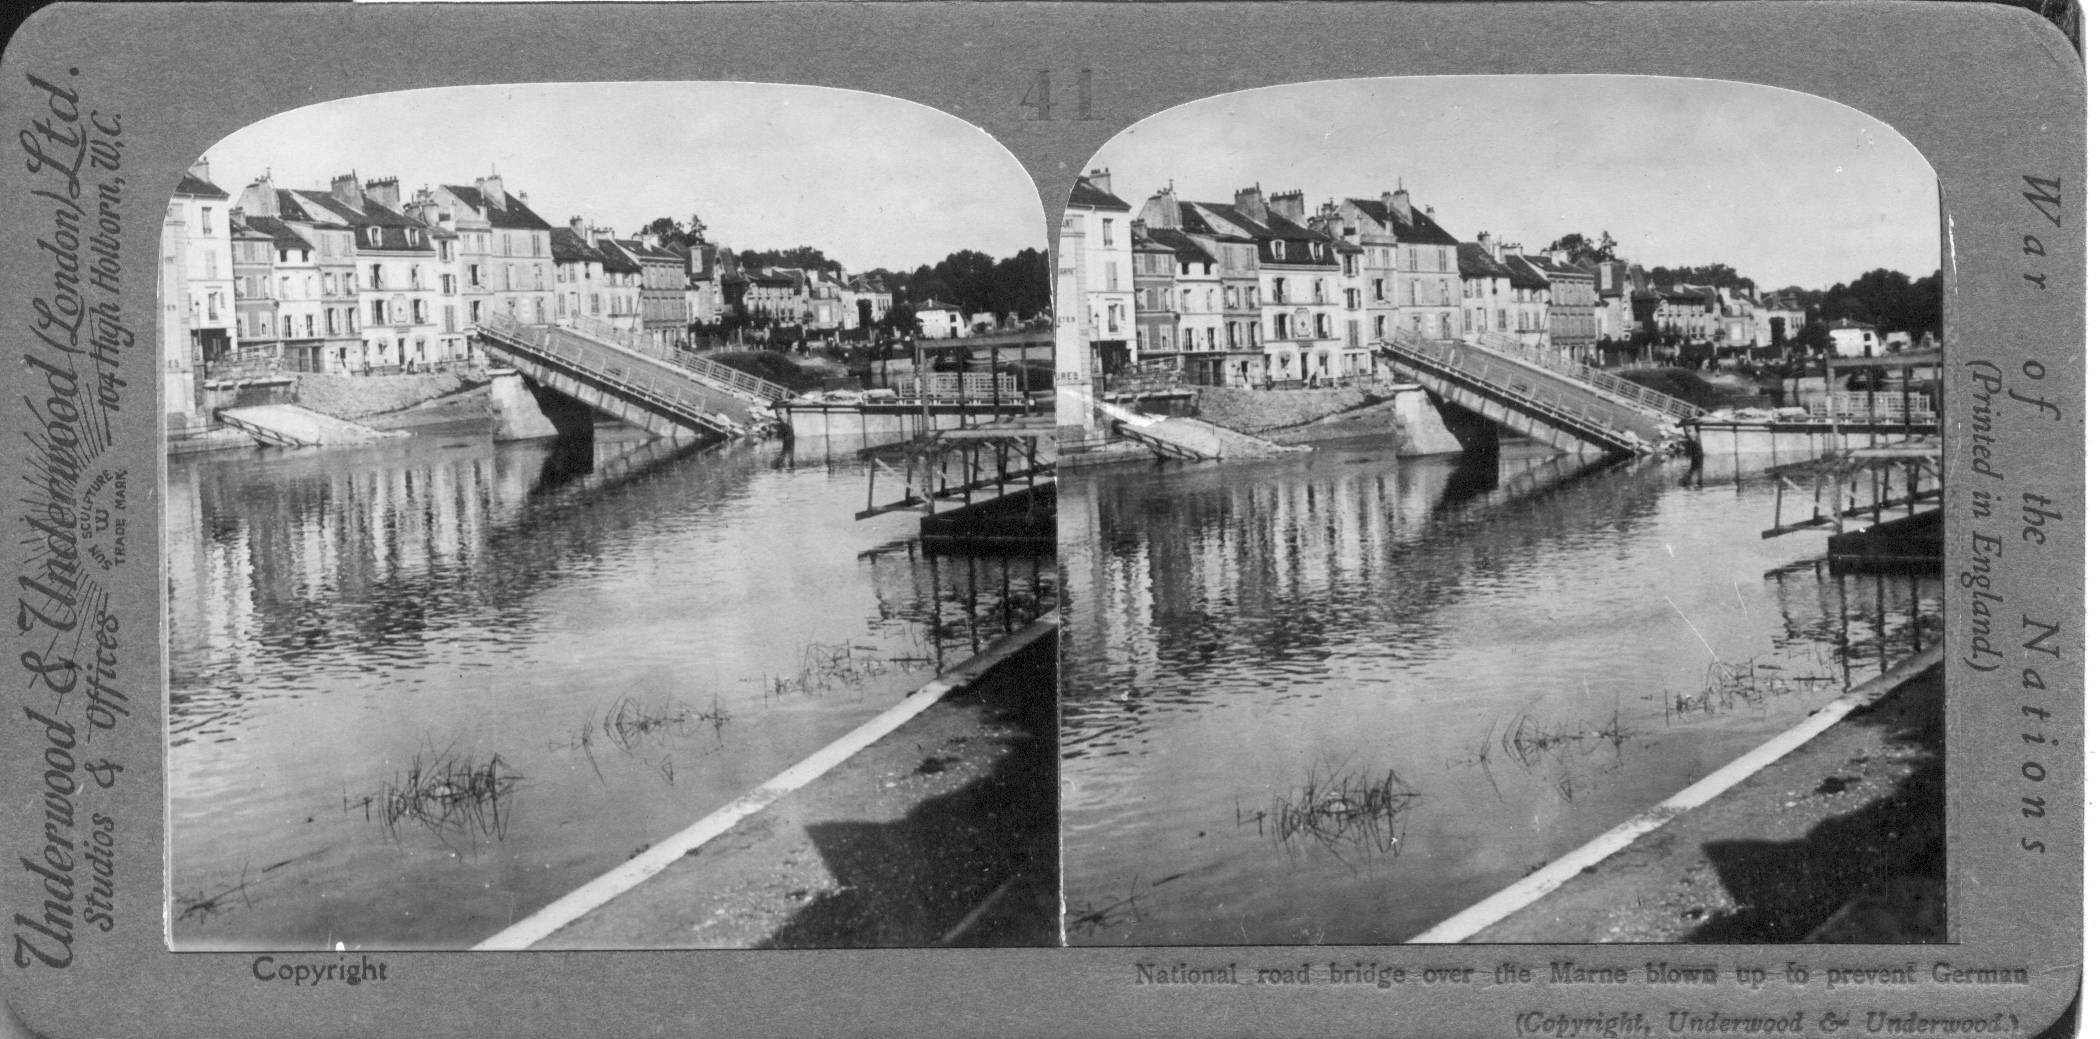 National road bridge over the Marne blown up to prevent German [advance]